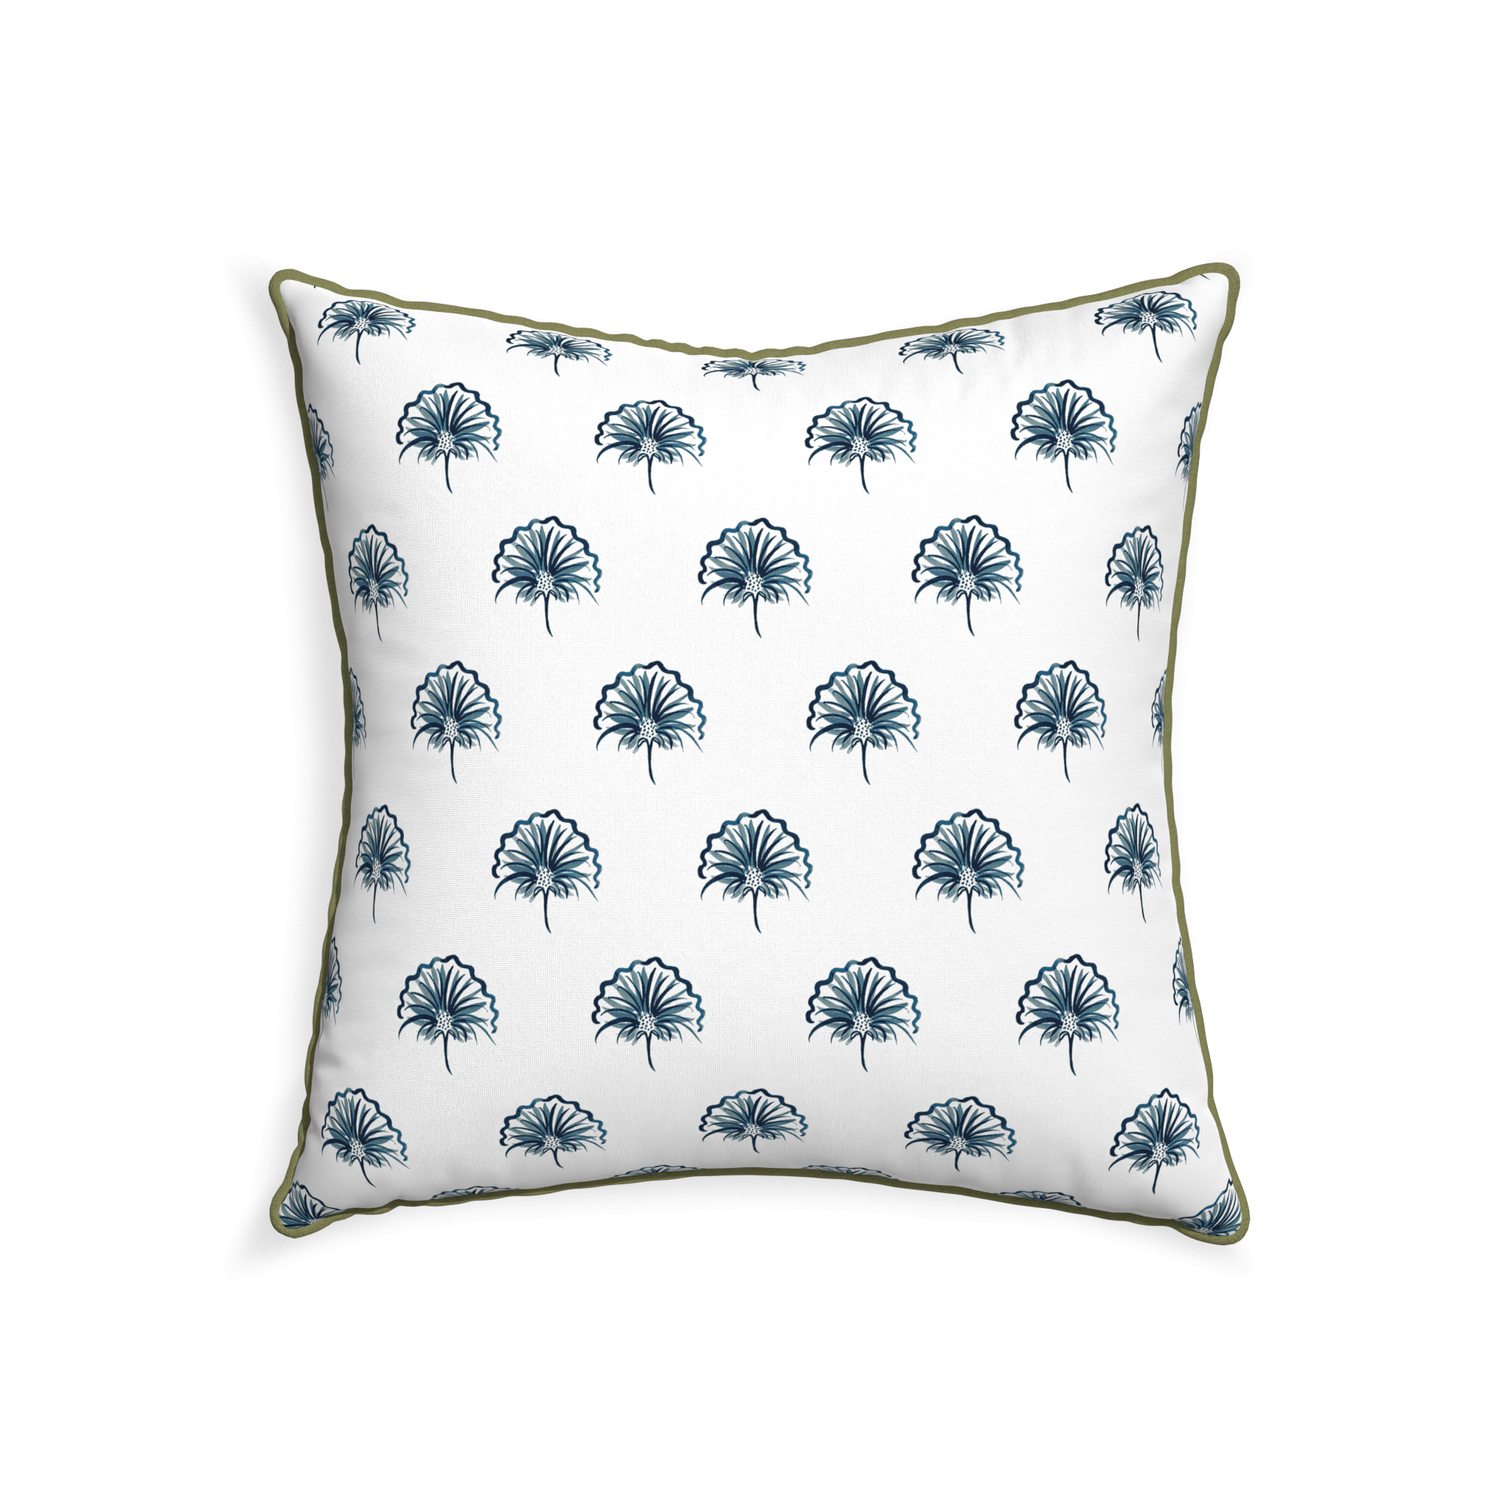 22-square penelope midnight custom floral navypillow with moss piping on white background